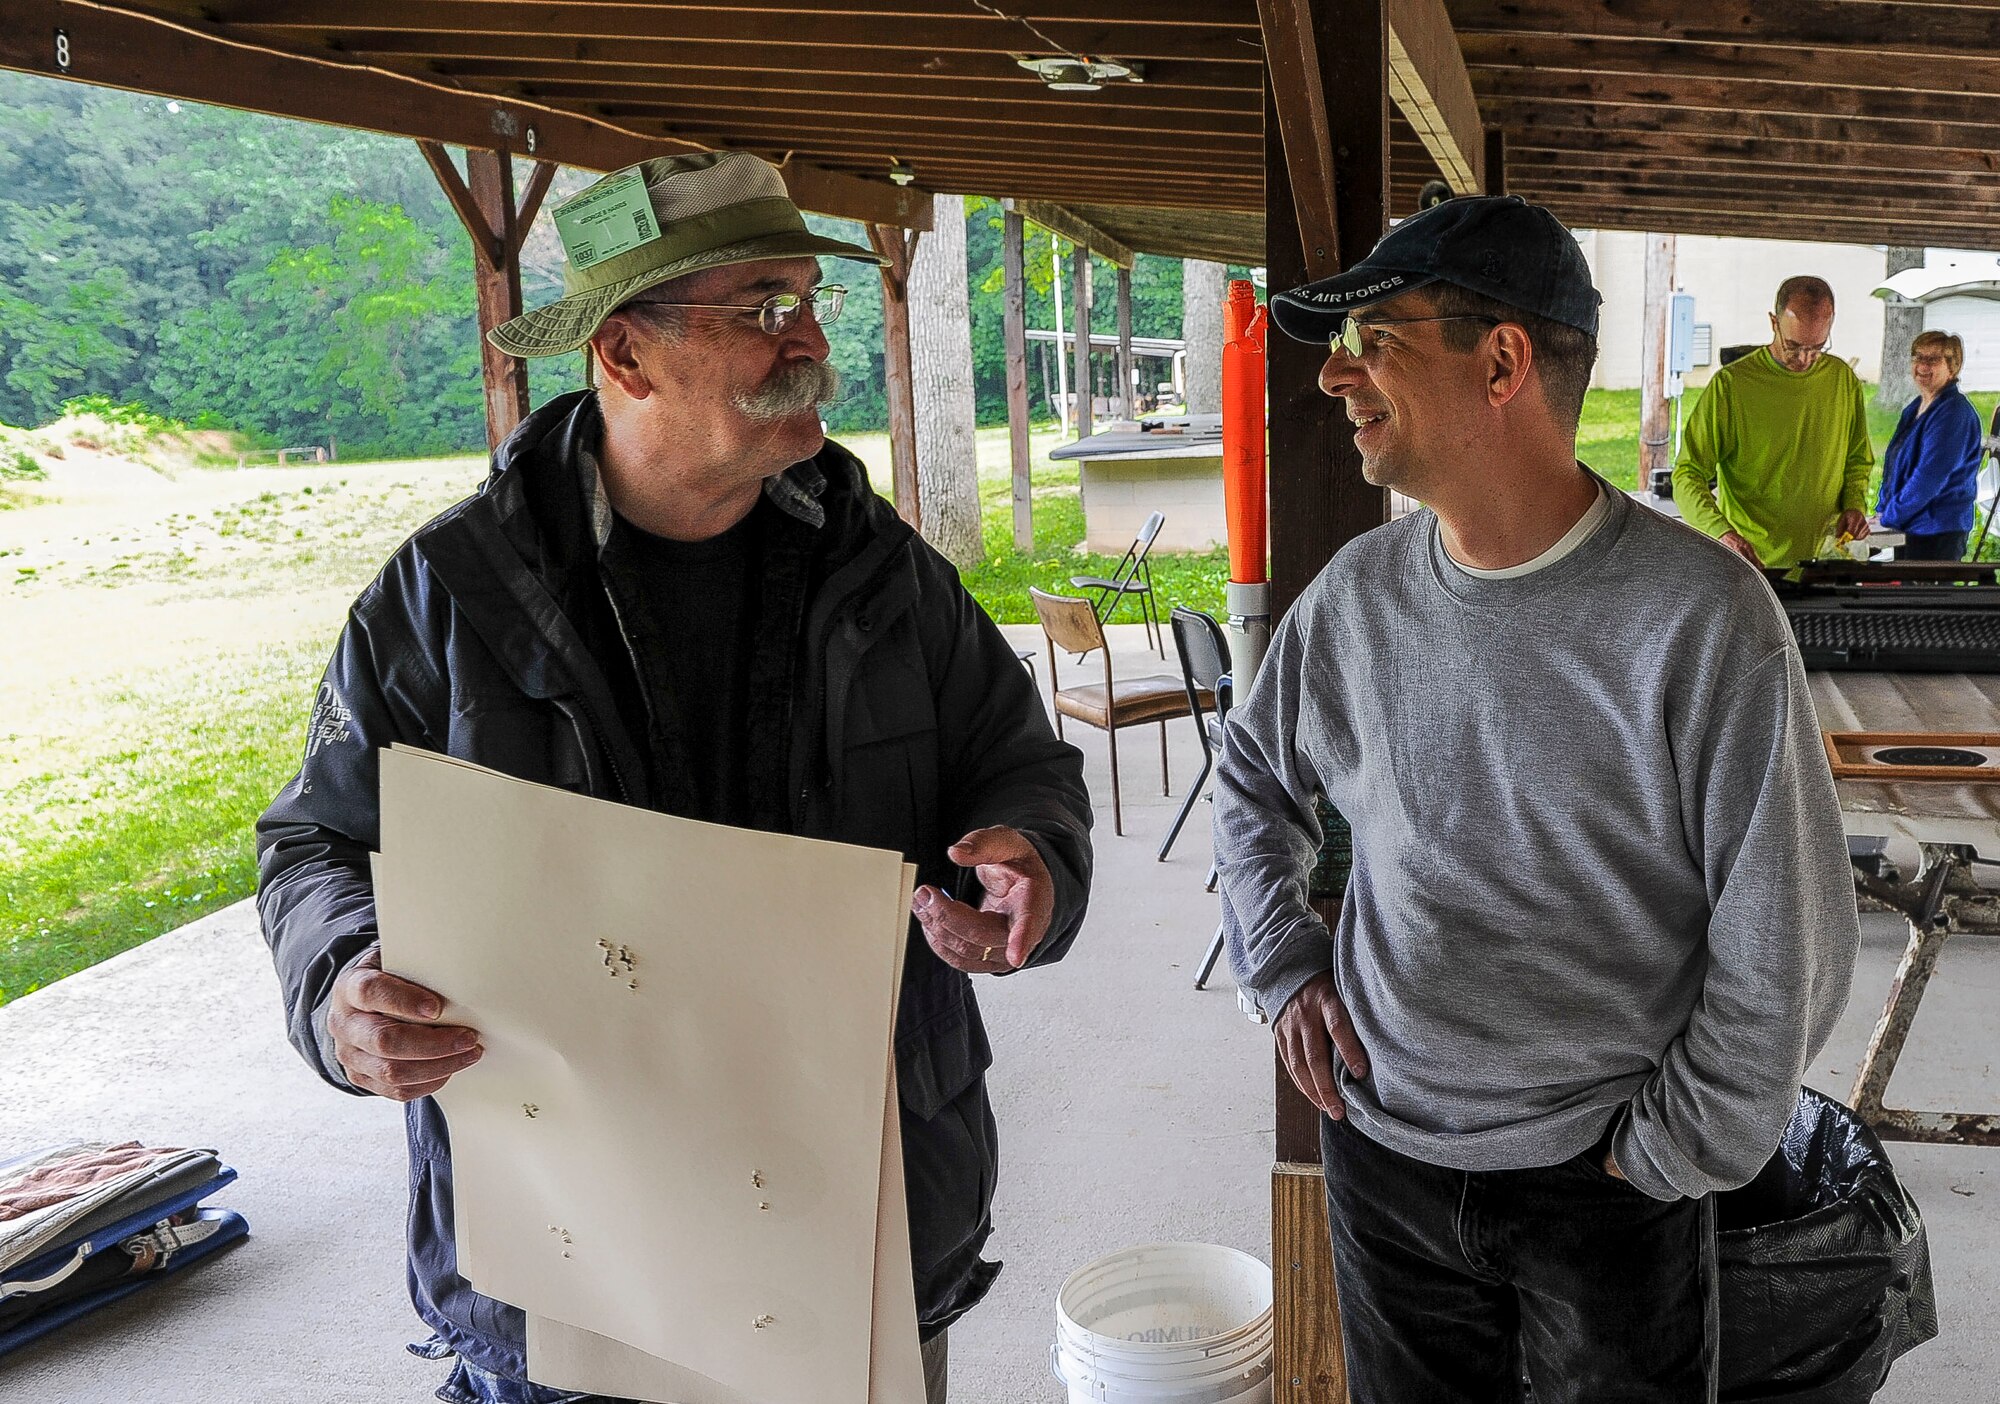 Lt. Col. Mark Gould (right) hands in his target and talks to instructor George Harris during a training class in New Freedom, Pa., June 26, 2015. Gould, a foreign liaison officer for the Defense Intelligence Agency’s Office of Partner Engagement at the Pentagon, has been involved in competitive shooting for the past 23 years and has been a member of the Air Force International Rifle Team for 17 years. Harris, a former manager of National Rifle Association rifle competitions for 26 years, instructed the two-day course. (U.S. Air Force photo/Staff Sgt. Christopher Gross)